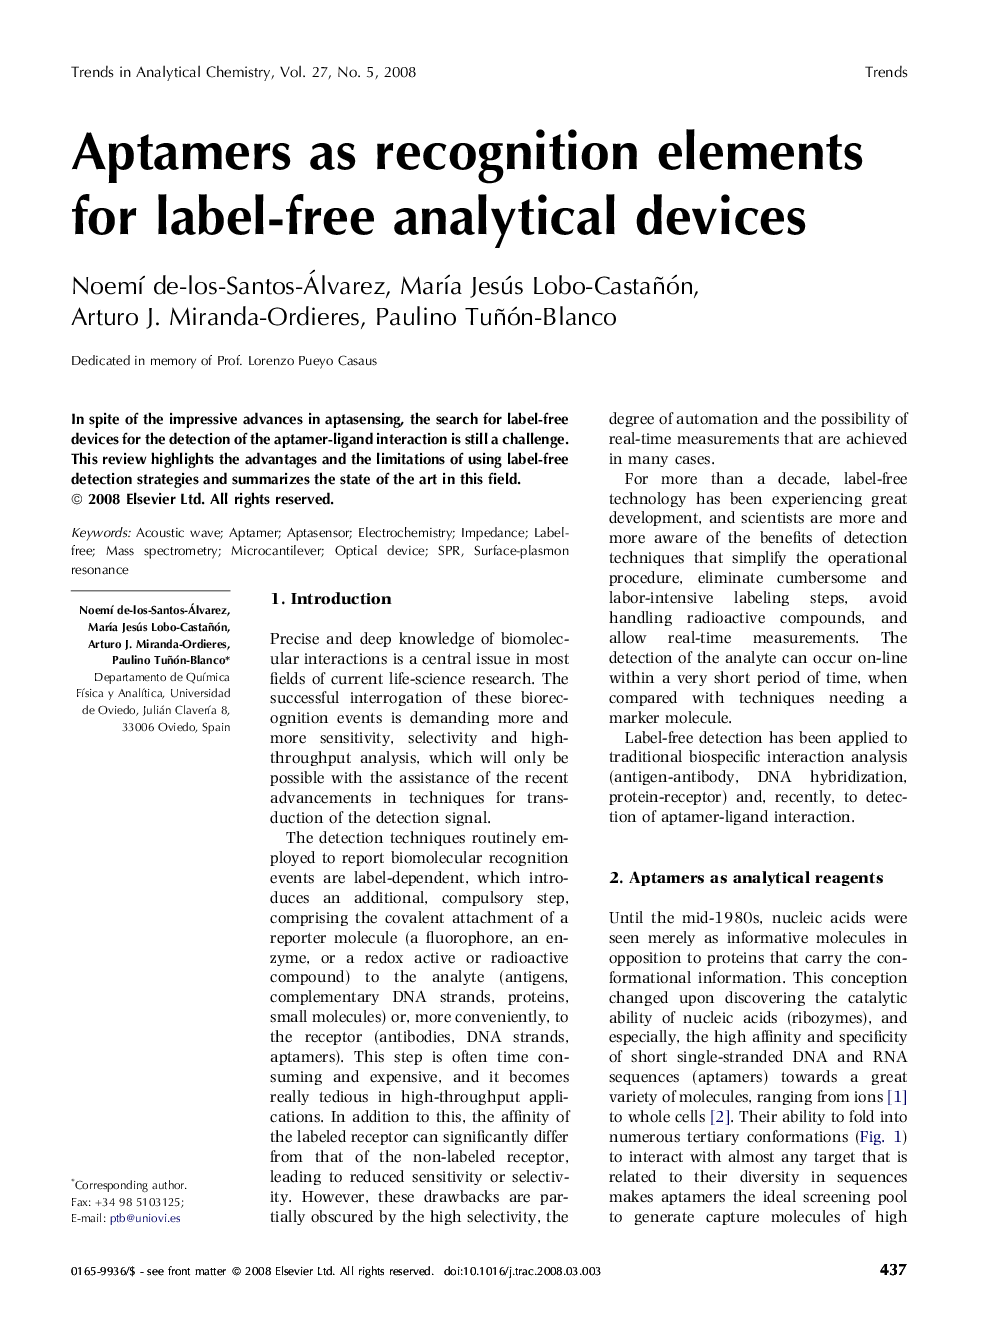 Aptamers as recognition elements for label-free analytical devices